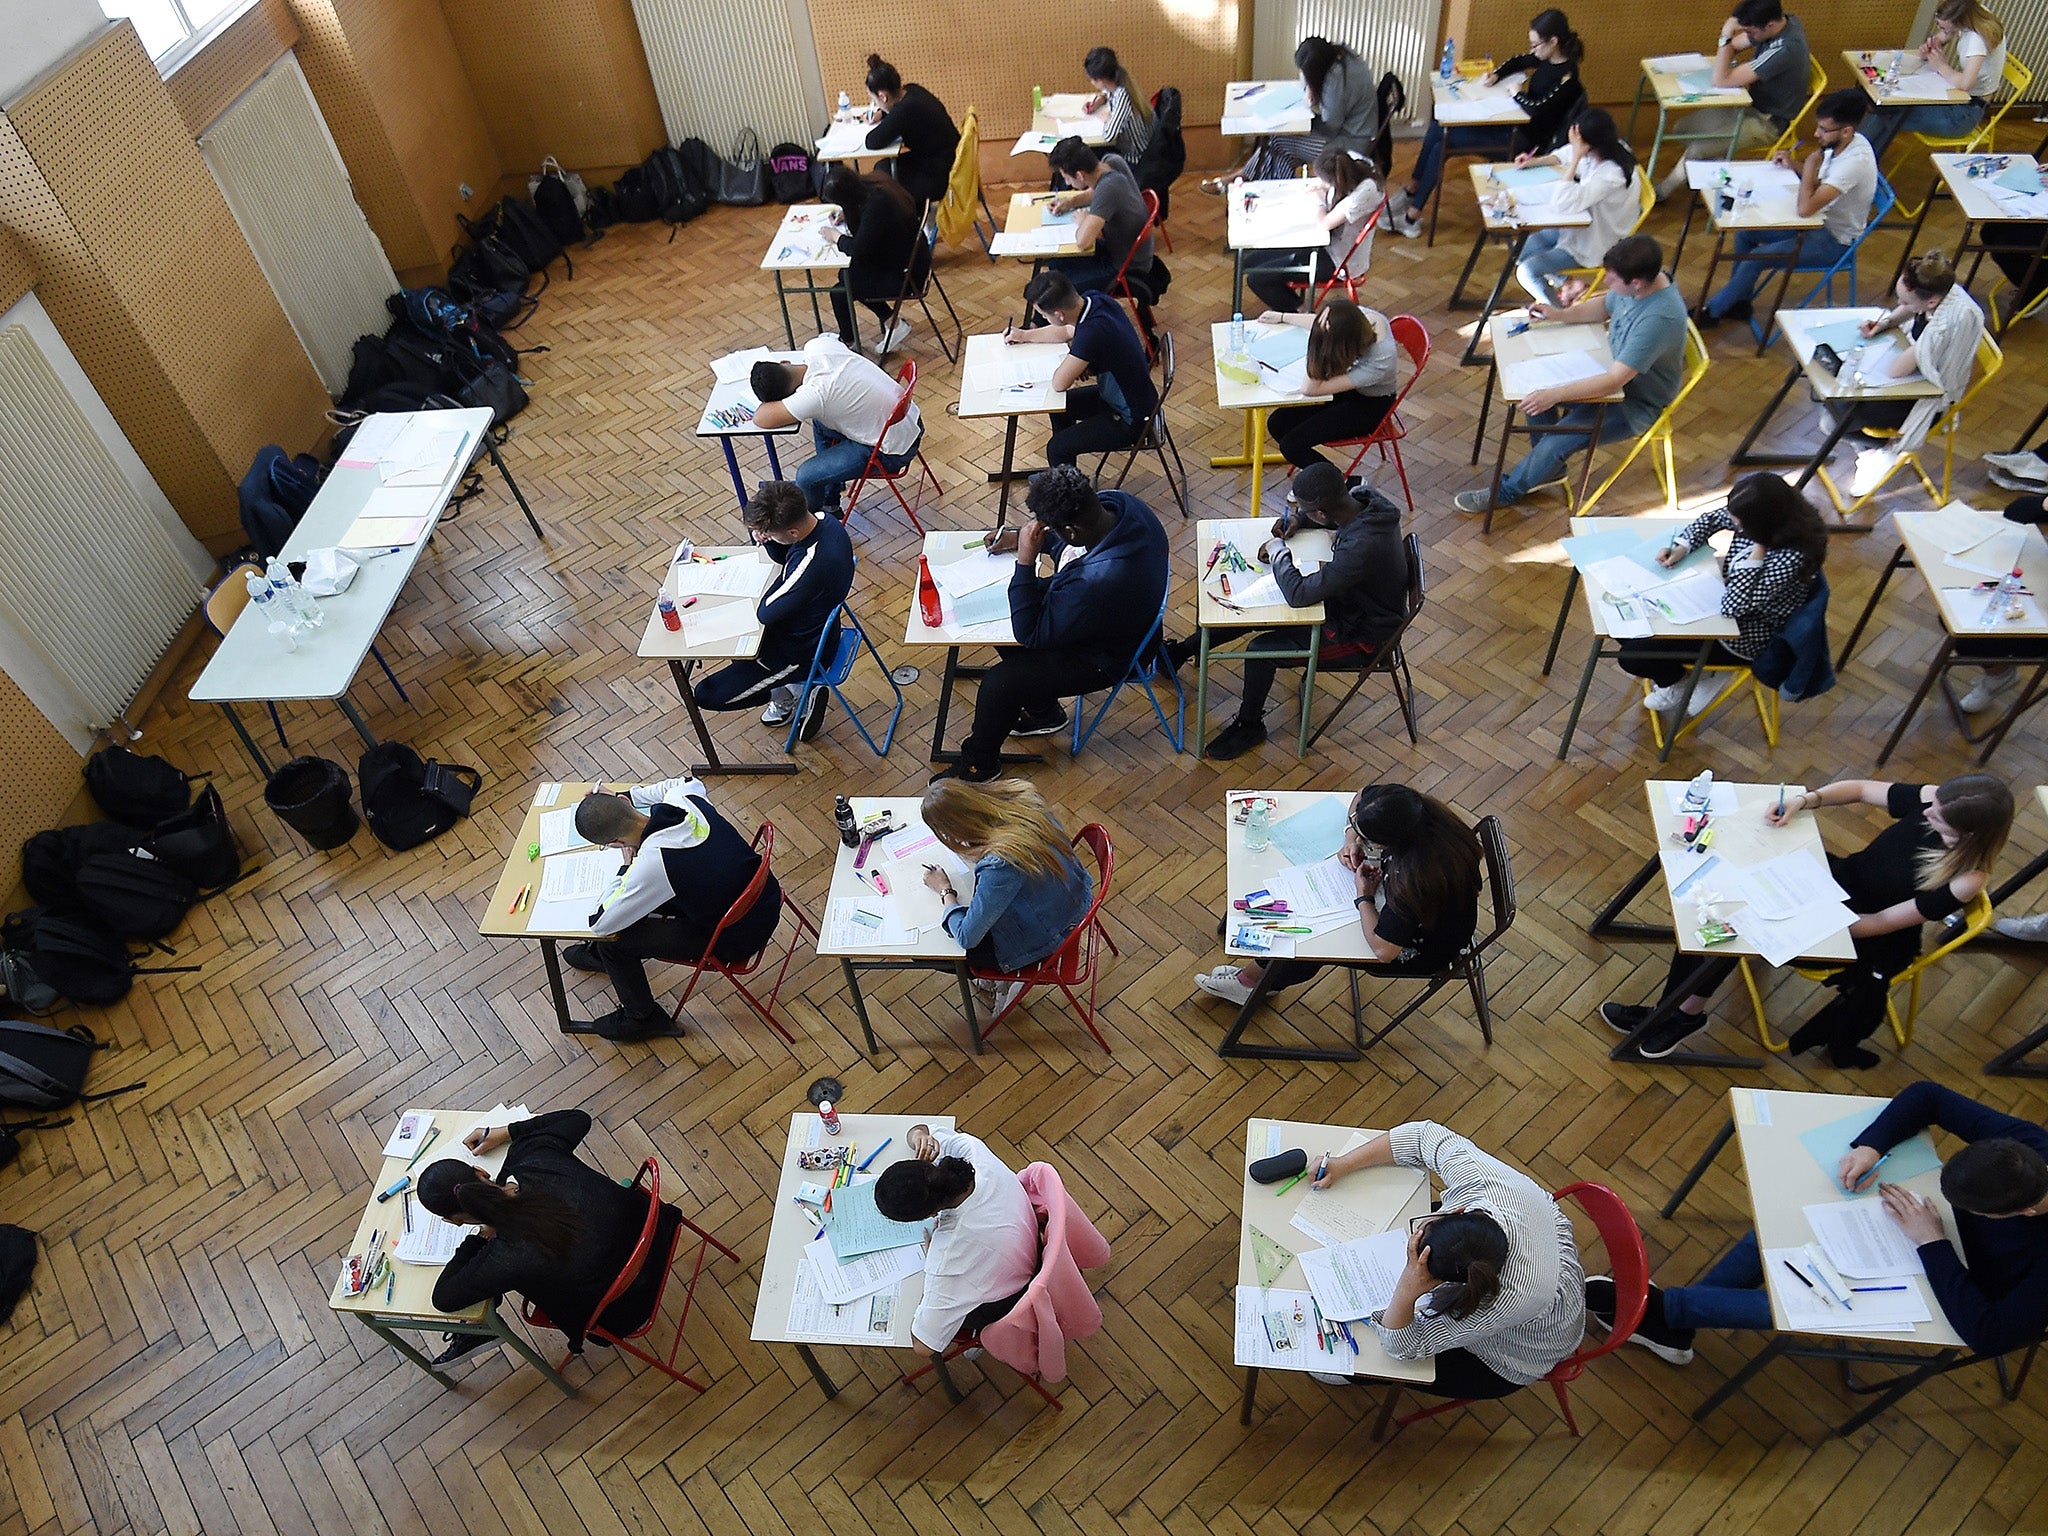 'It is regrettable that the actions of a tiny number of individuals have added to the stress of this year's exams for a much larger number of students'